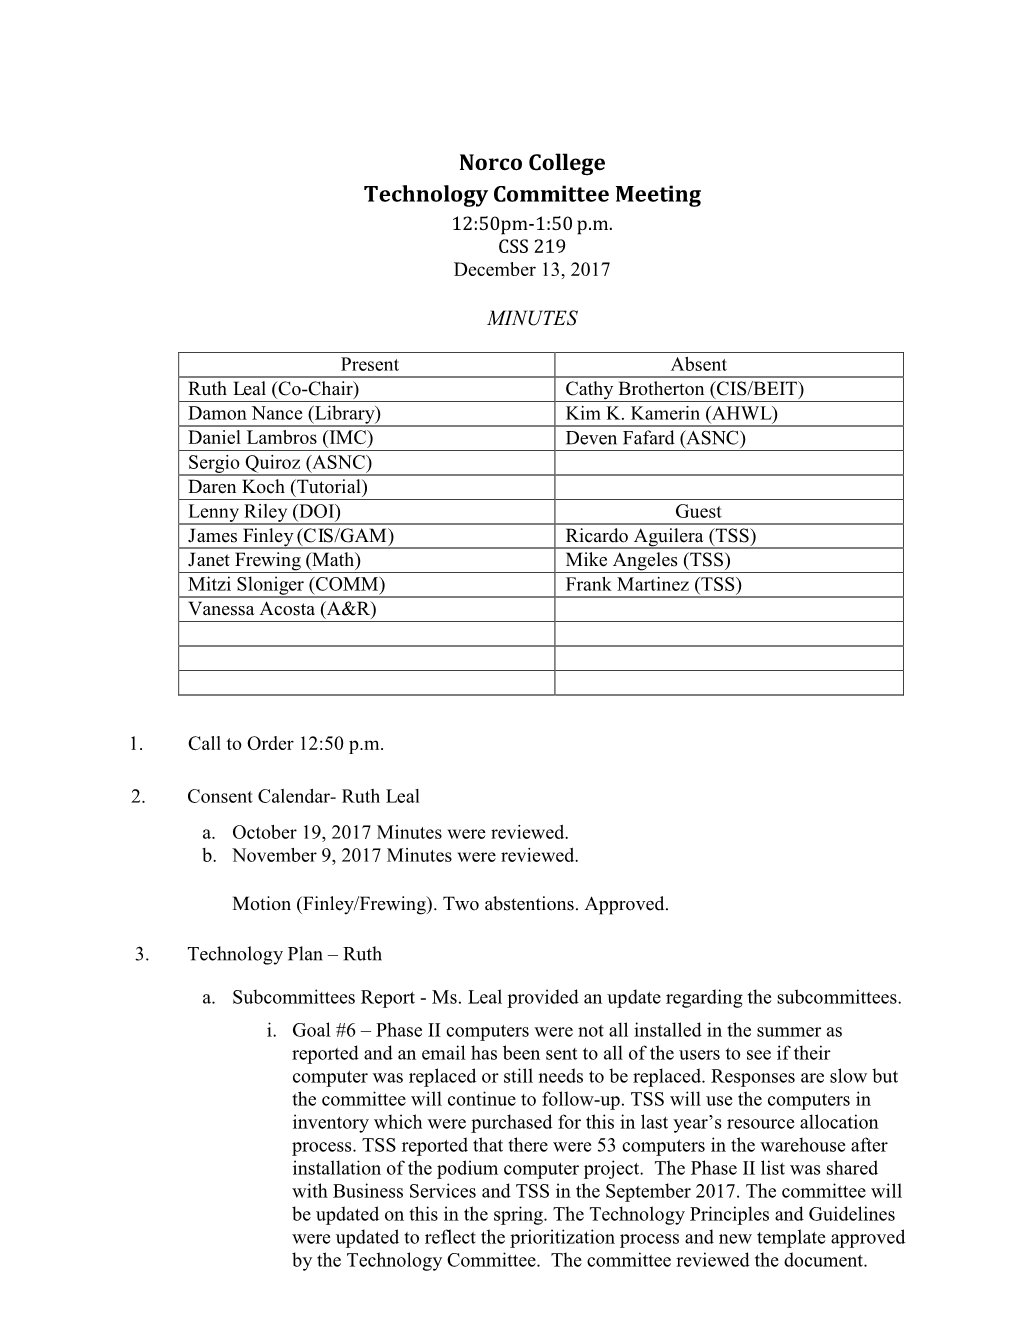 Norco College Technology Committee Meeting 12:50Pm-1:50 P.M